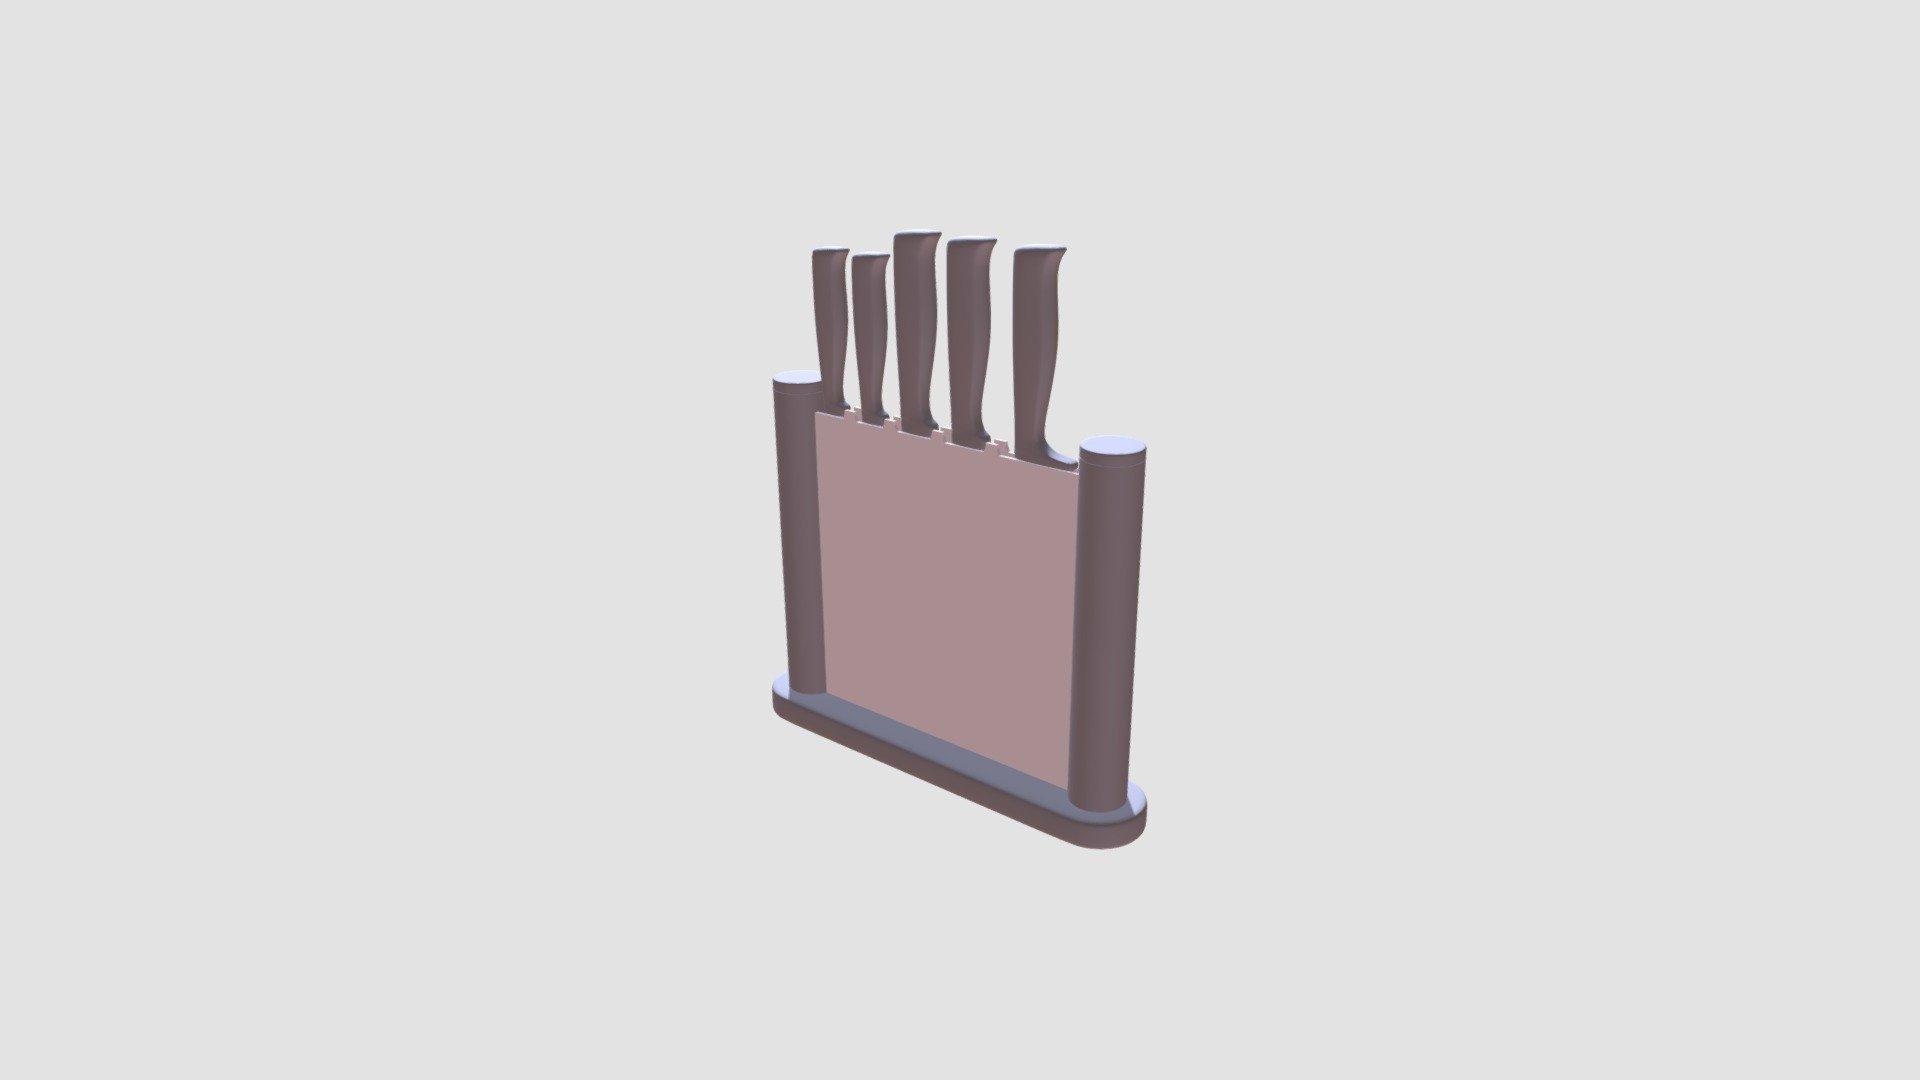 Highly detailed 3d model of knife rack with all textures, shaders and materials. It is ready to use, just put it into your scene 3d model